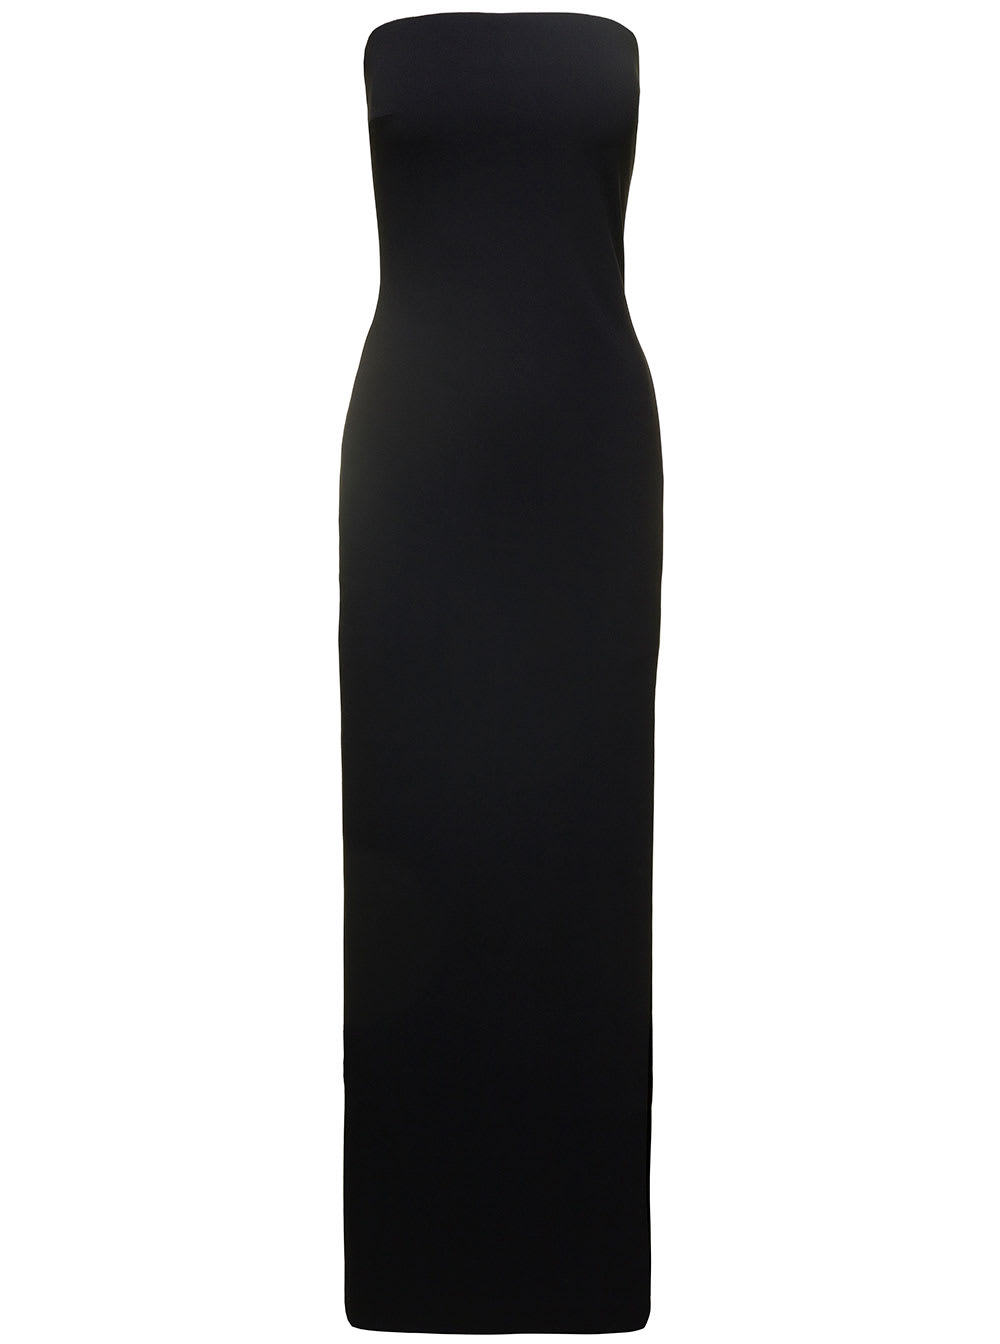 SOLACE LONDON BLACK MAXI ZORA DRESS WITH DEEP FRONT VENT IN POLYESTER WOMAN